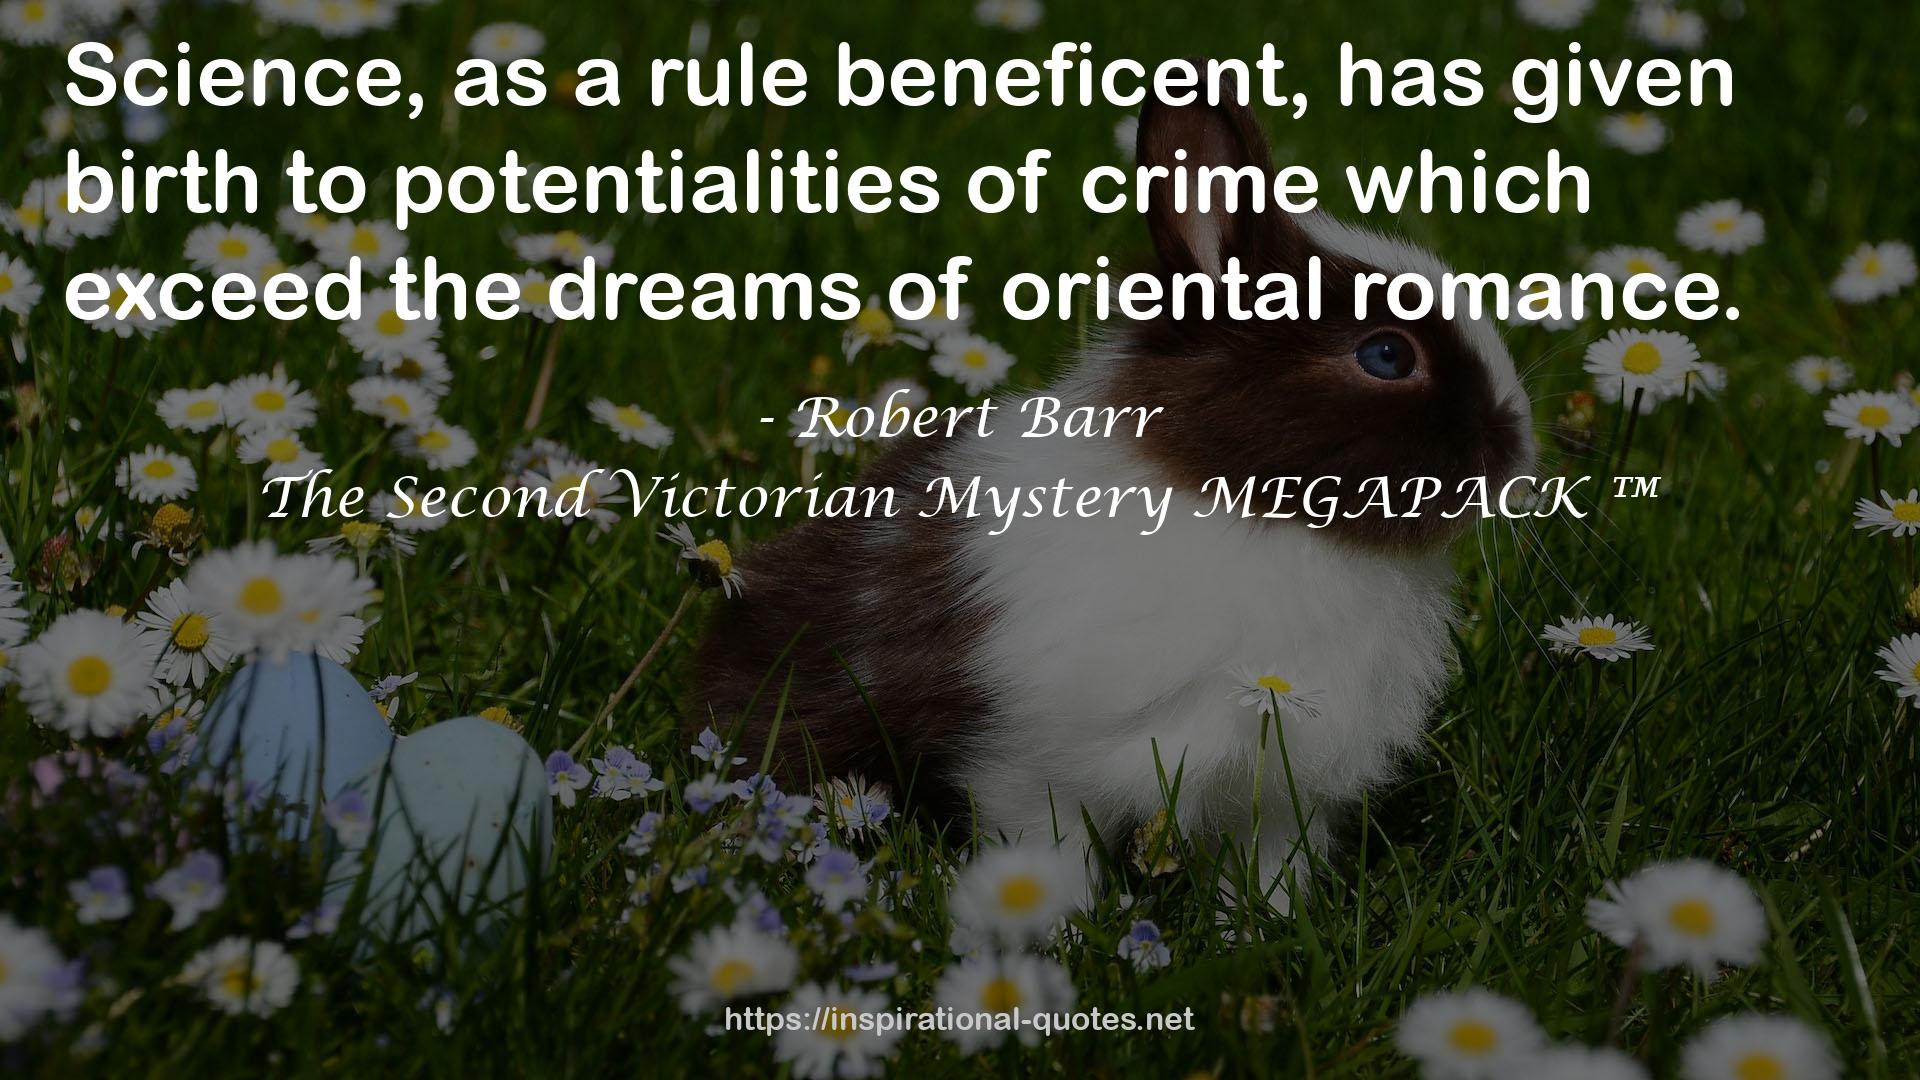 The Second Victorian Mystery MEGAPACK ™ QUOTES